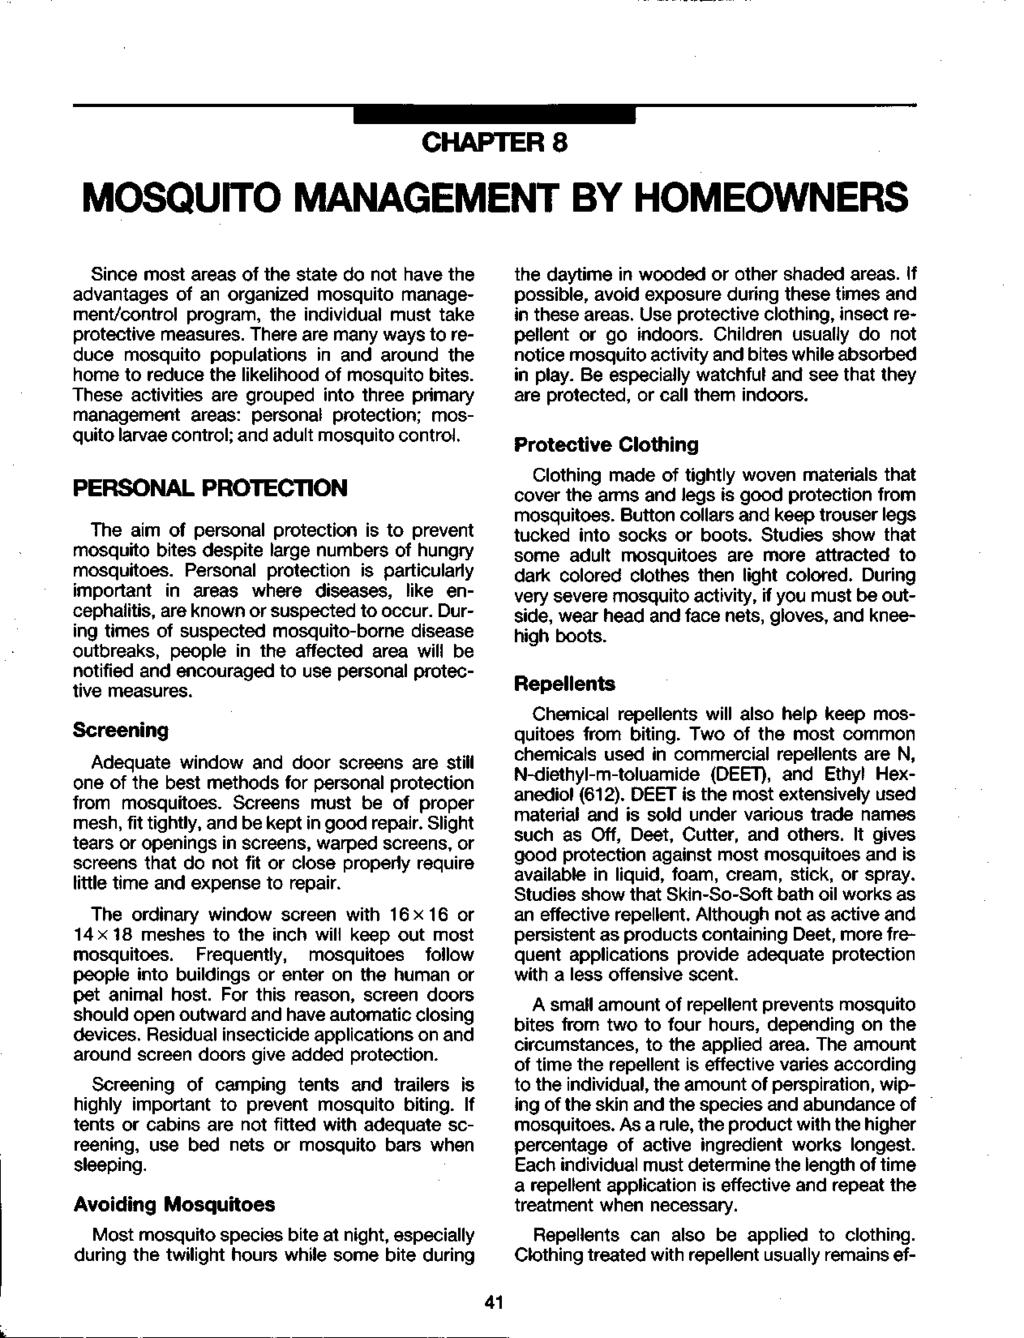 CHAPTER 8 MOSQUITO MANAGEMENT BY HOMEOWNERS Since most areas of the state do not have the advantages of an organized mosquito management/control program, the individual must take protective measures.